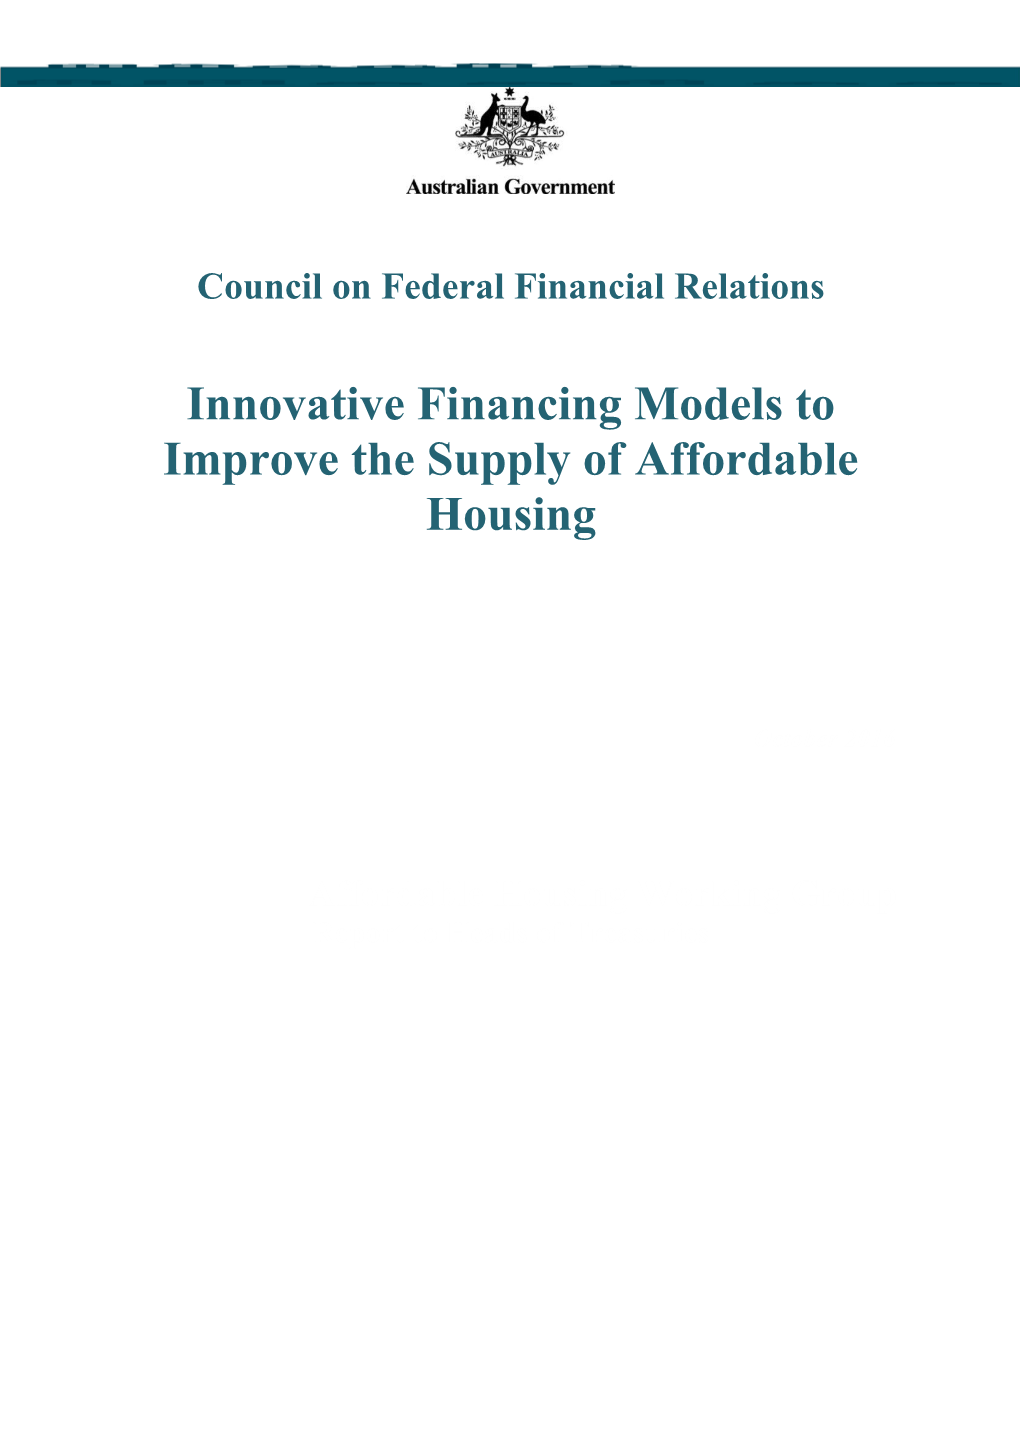 Innovative Financing Models to Improve the Supply of Affordable Housing